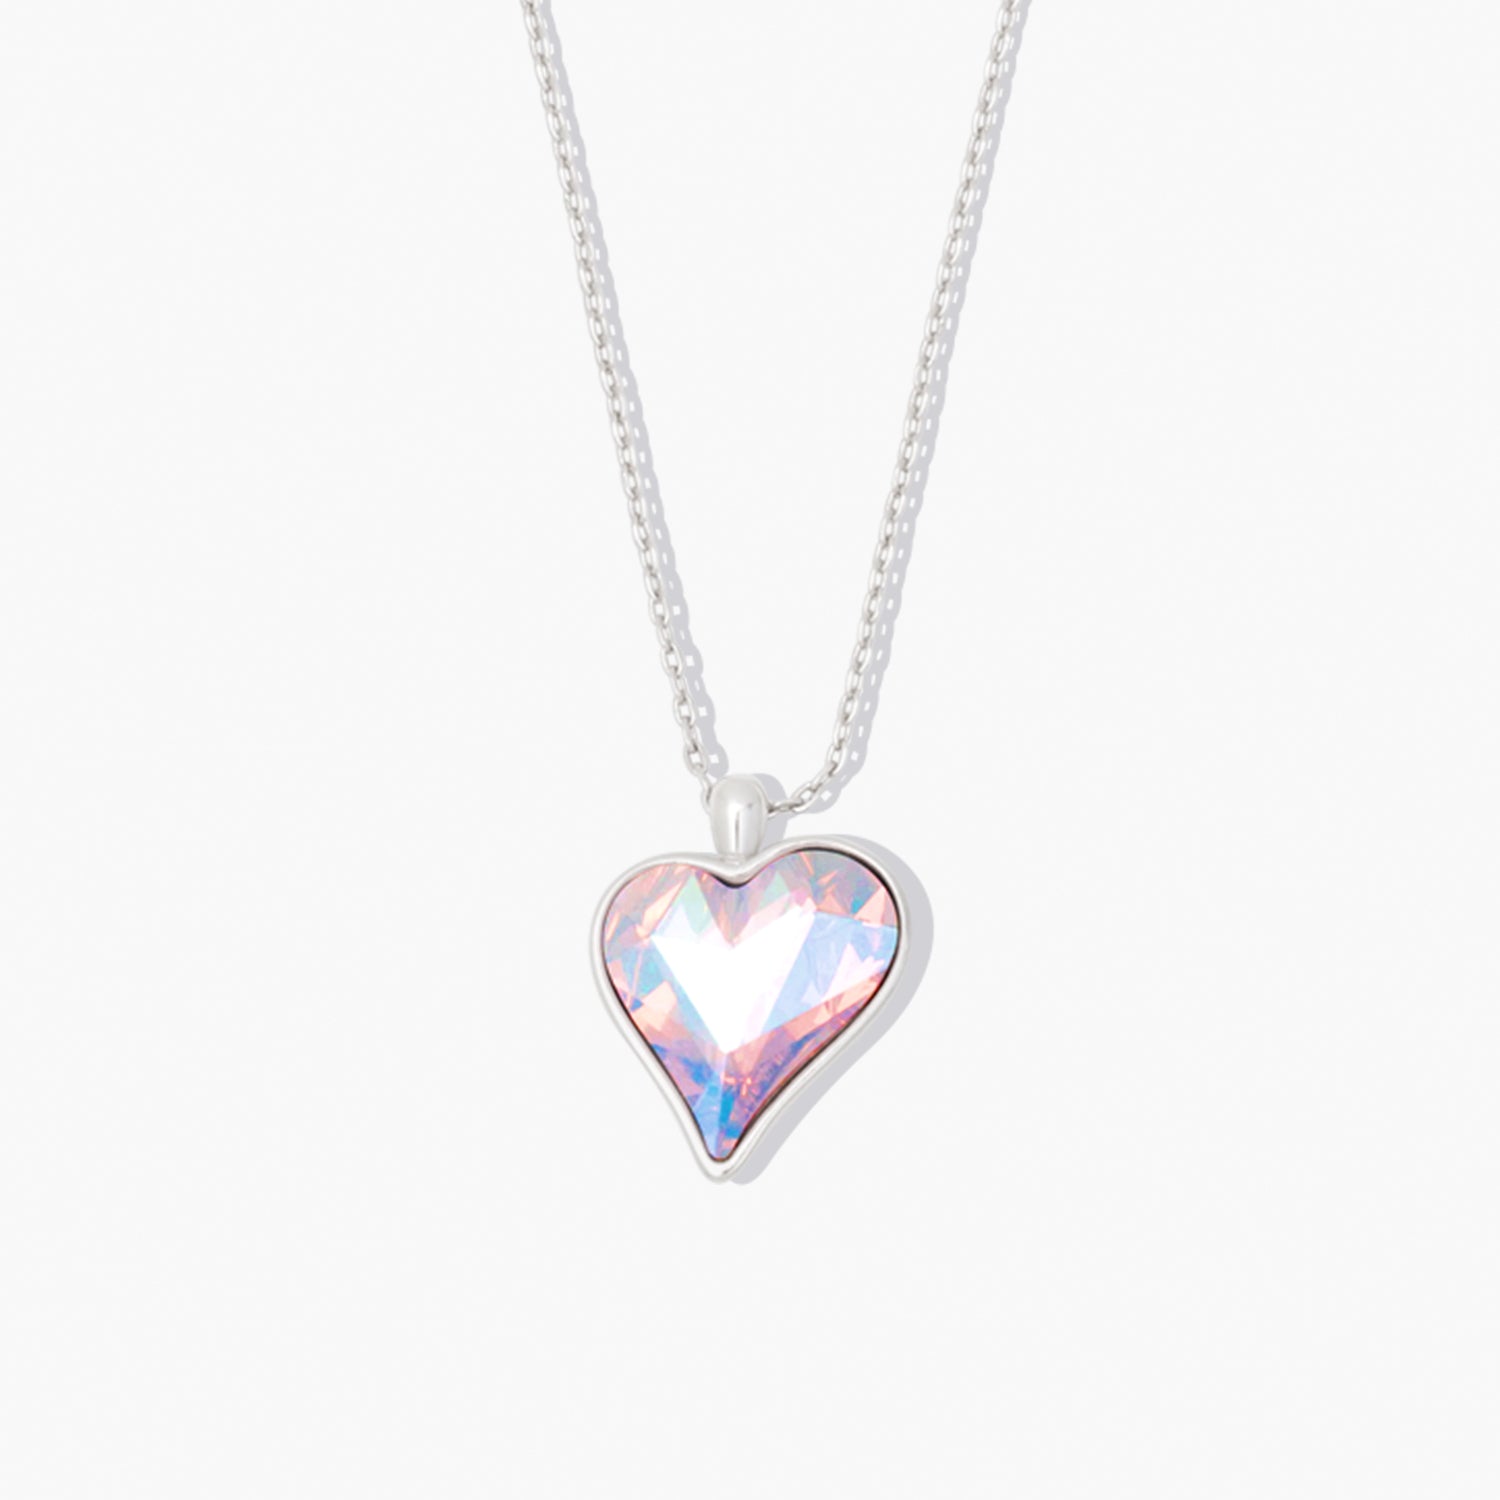 ChainsHouse Puzzle Friendship Necklace Stainless Steel BFF Necklace,  2/3/4/5/6/7/8pcs Personalized Matching Heart Pendant Friendship Necklaces  for Women Men, Send Gift Box - Walmart.com